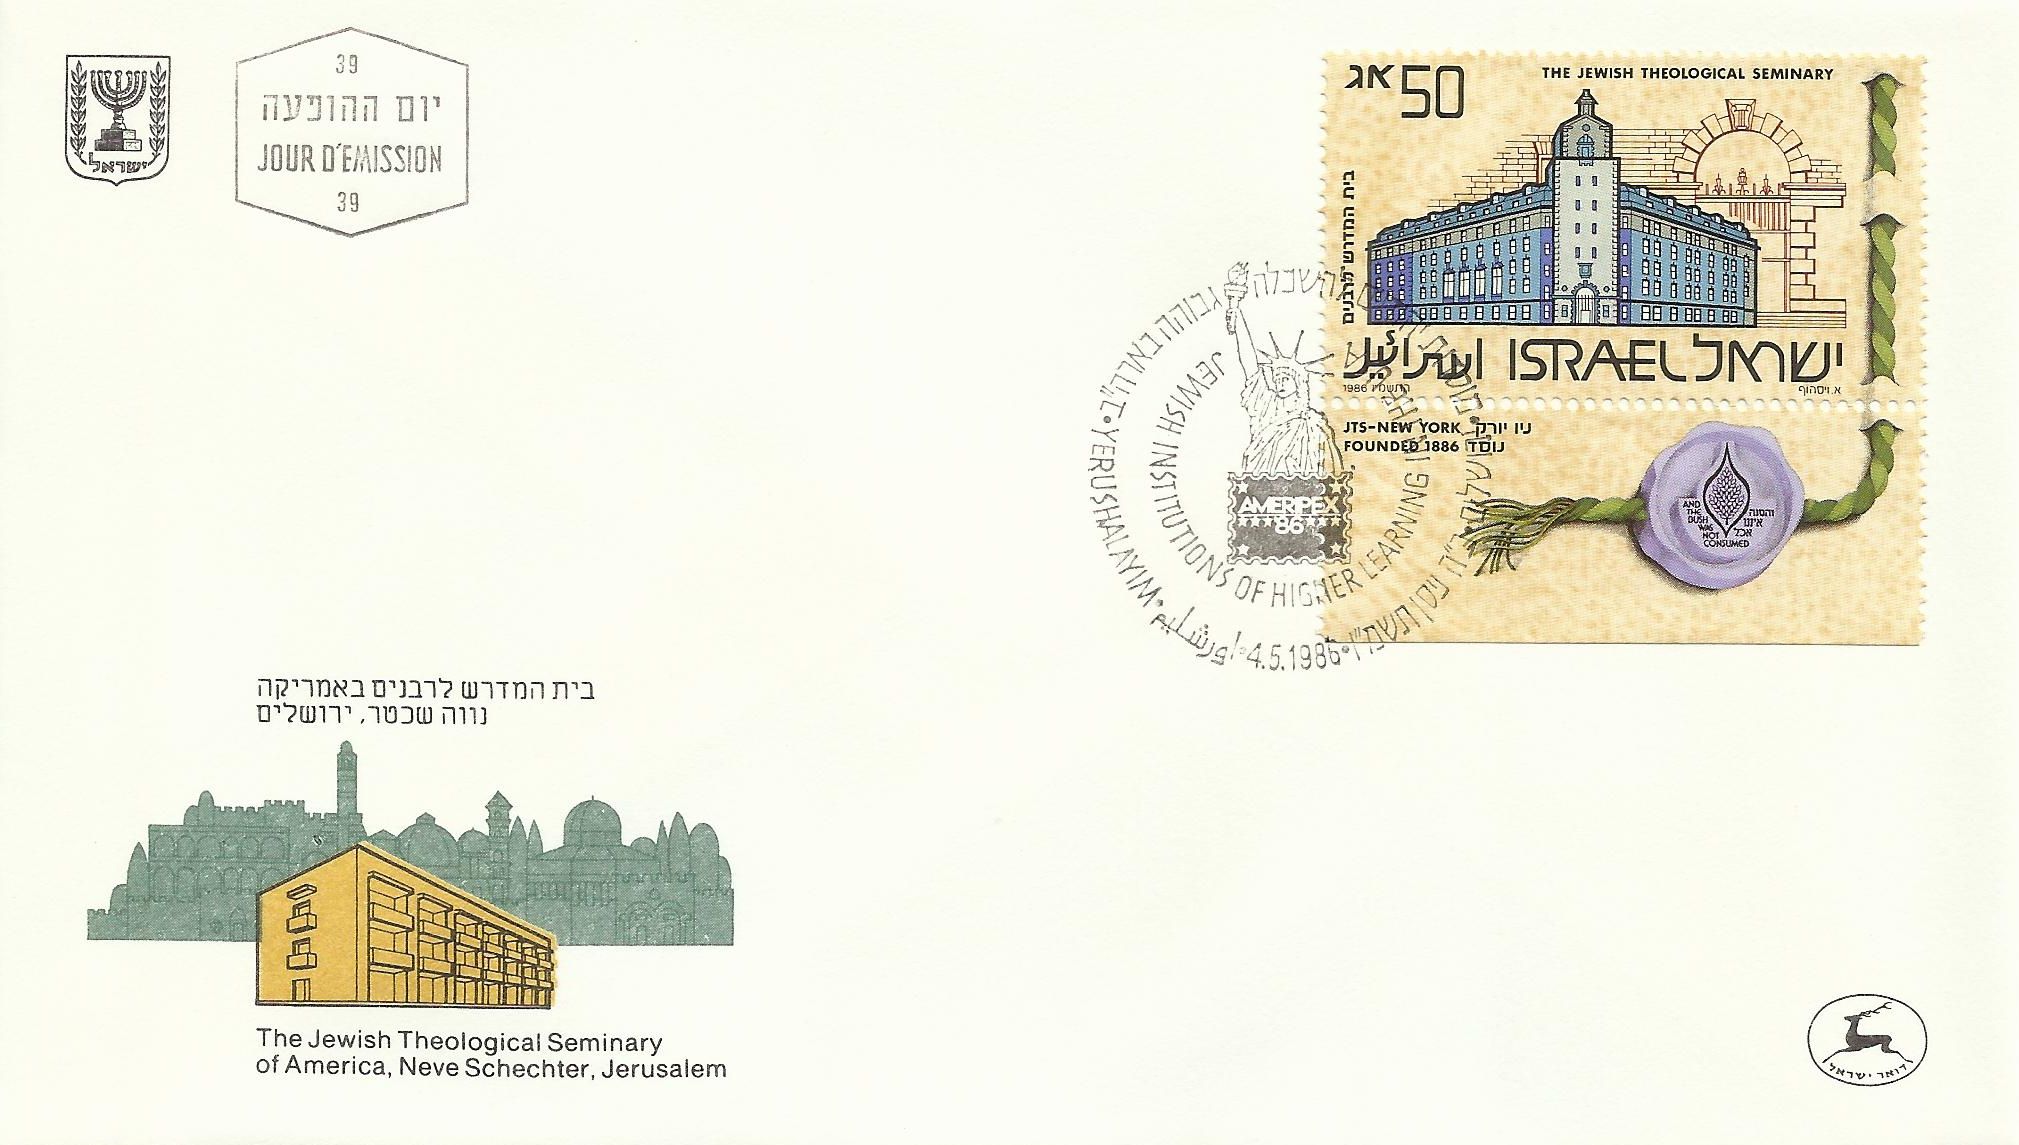 http://static.israelphilately.org.il/images/stamps/70_L.jpg